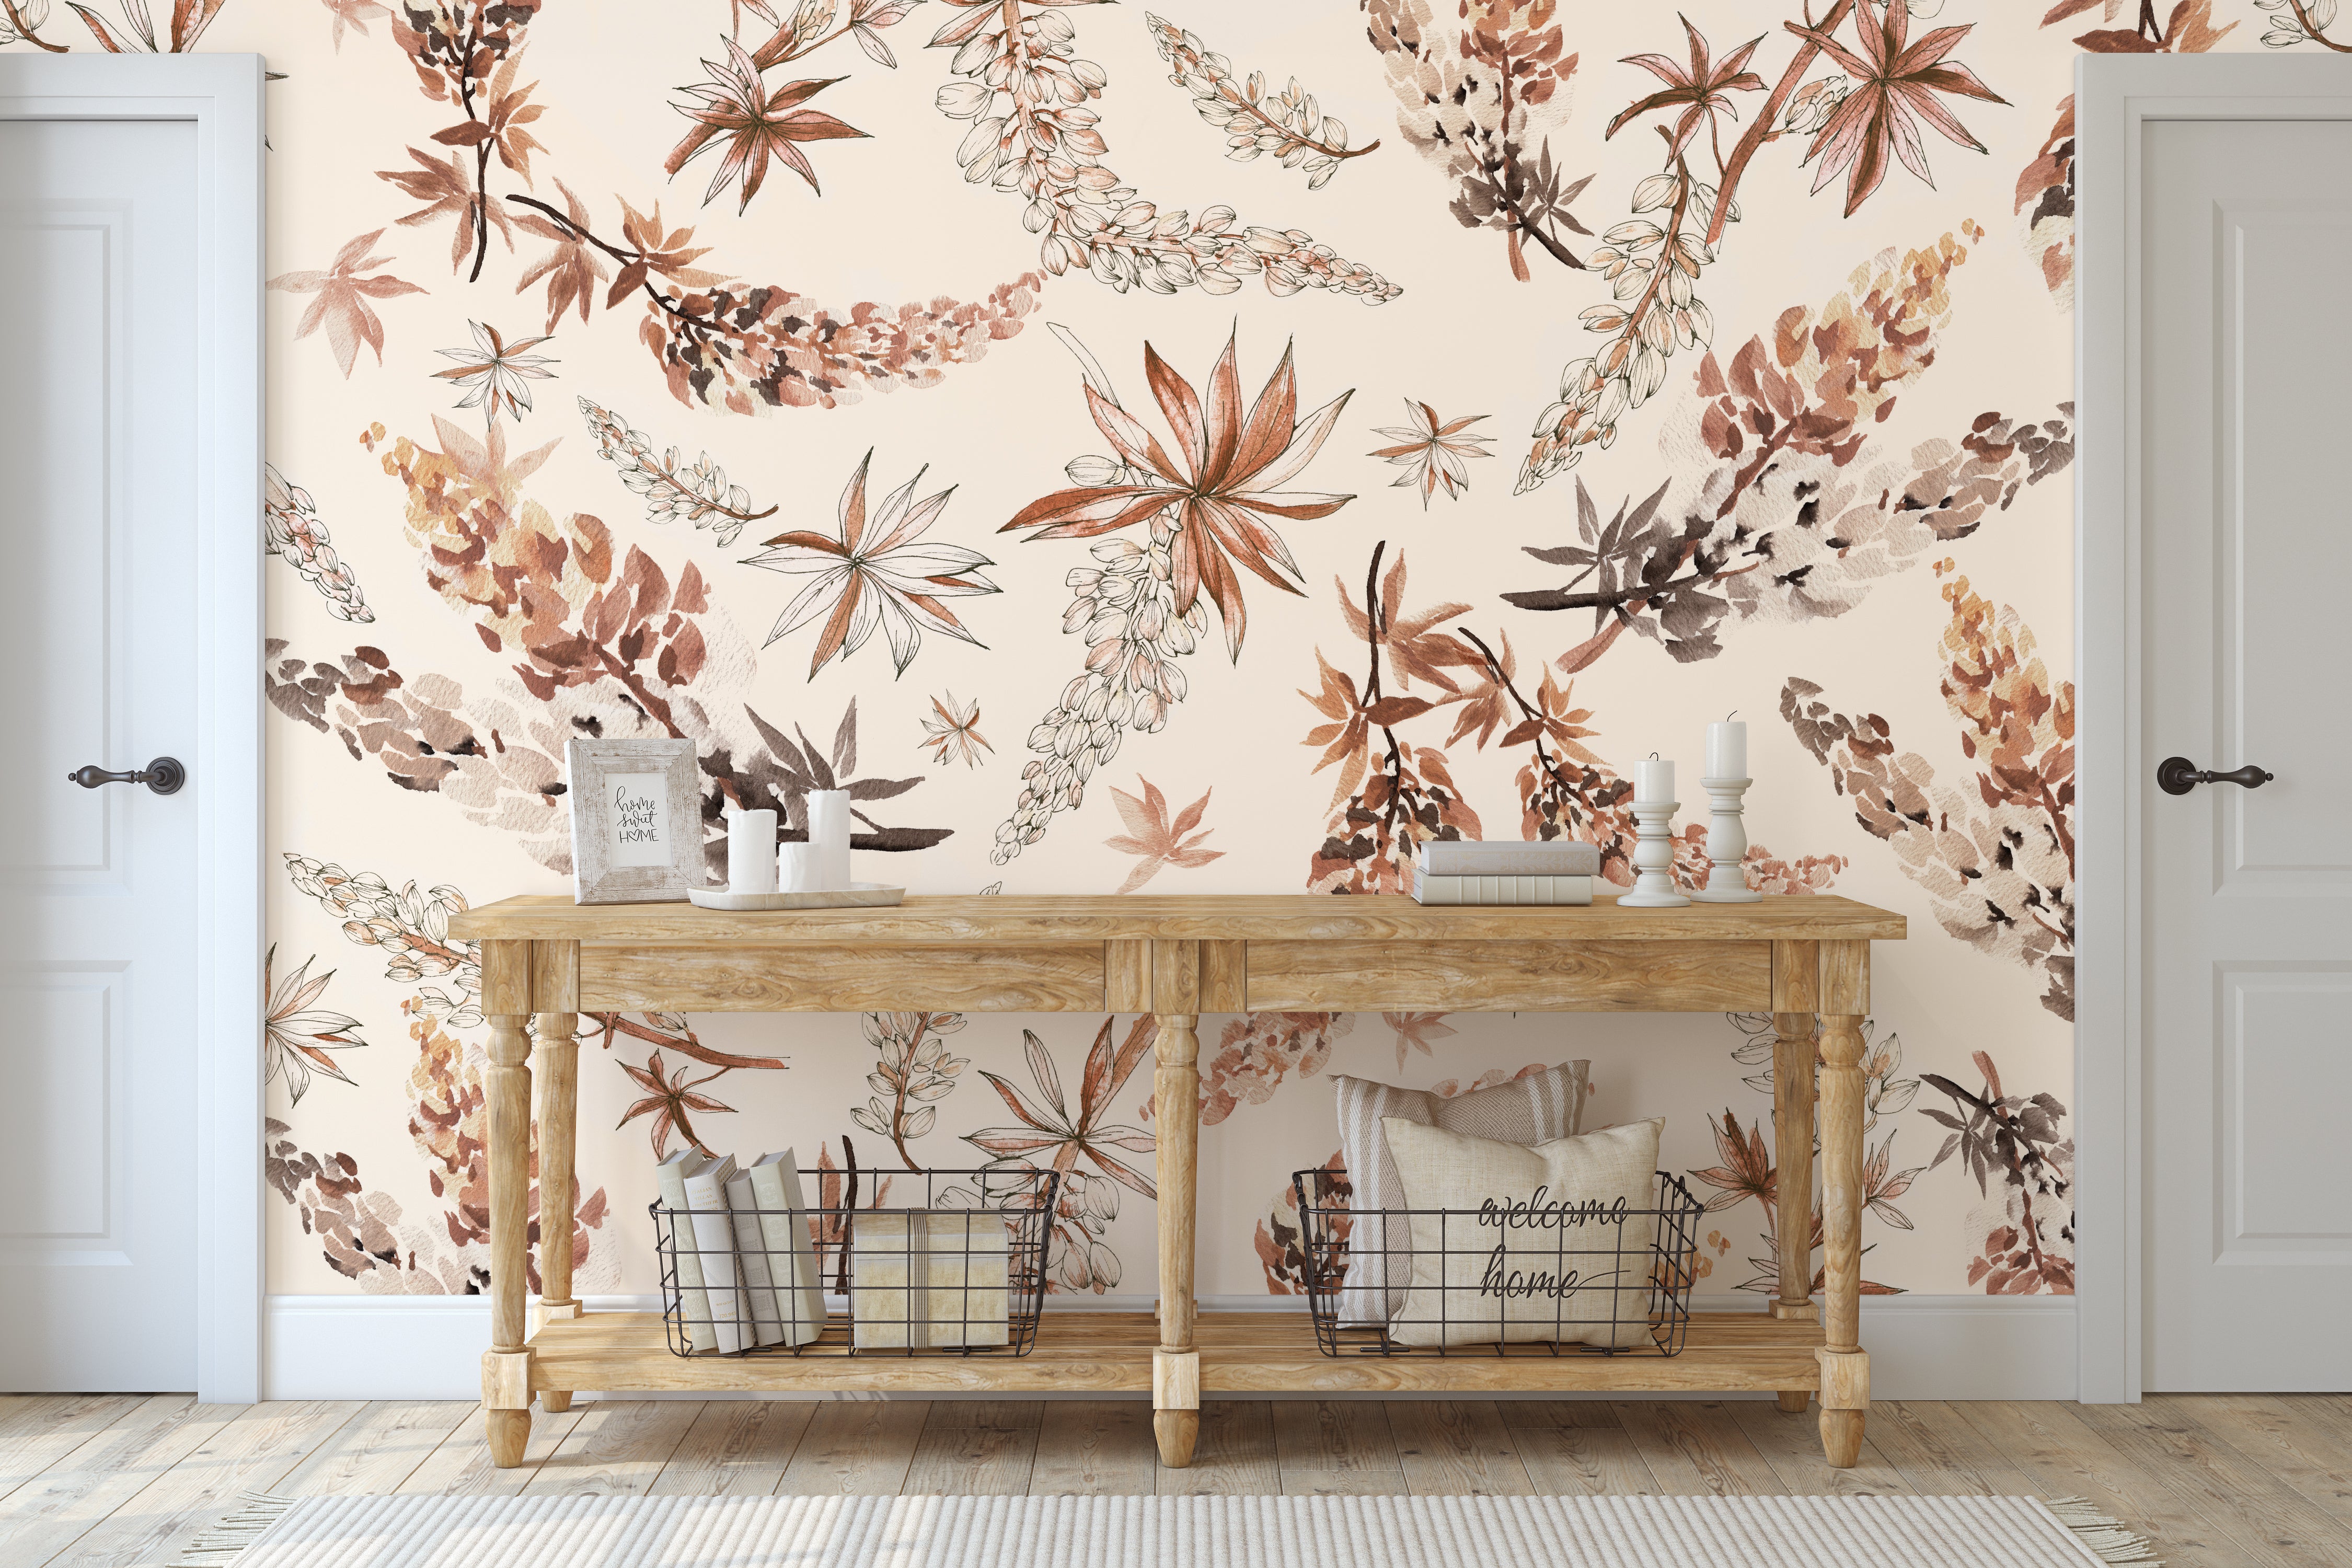 Piper’s Meadow Wallpaper - The Ania Zwara Line from WALL BLUSH